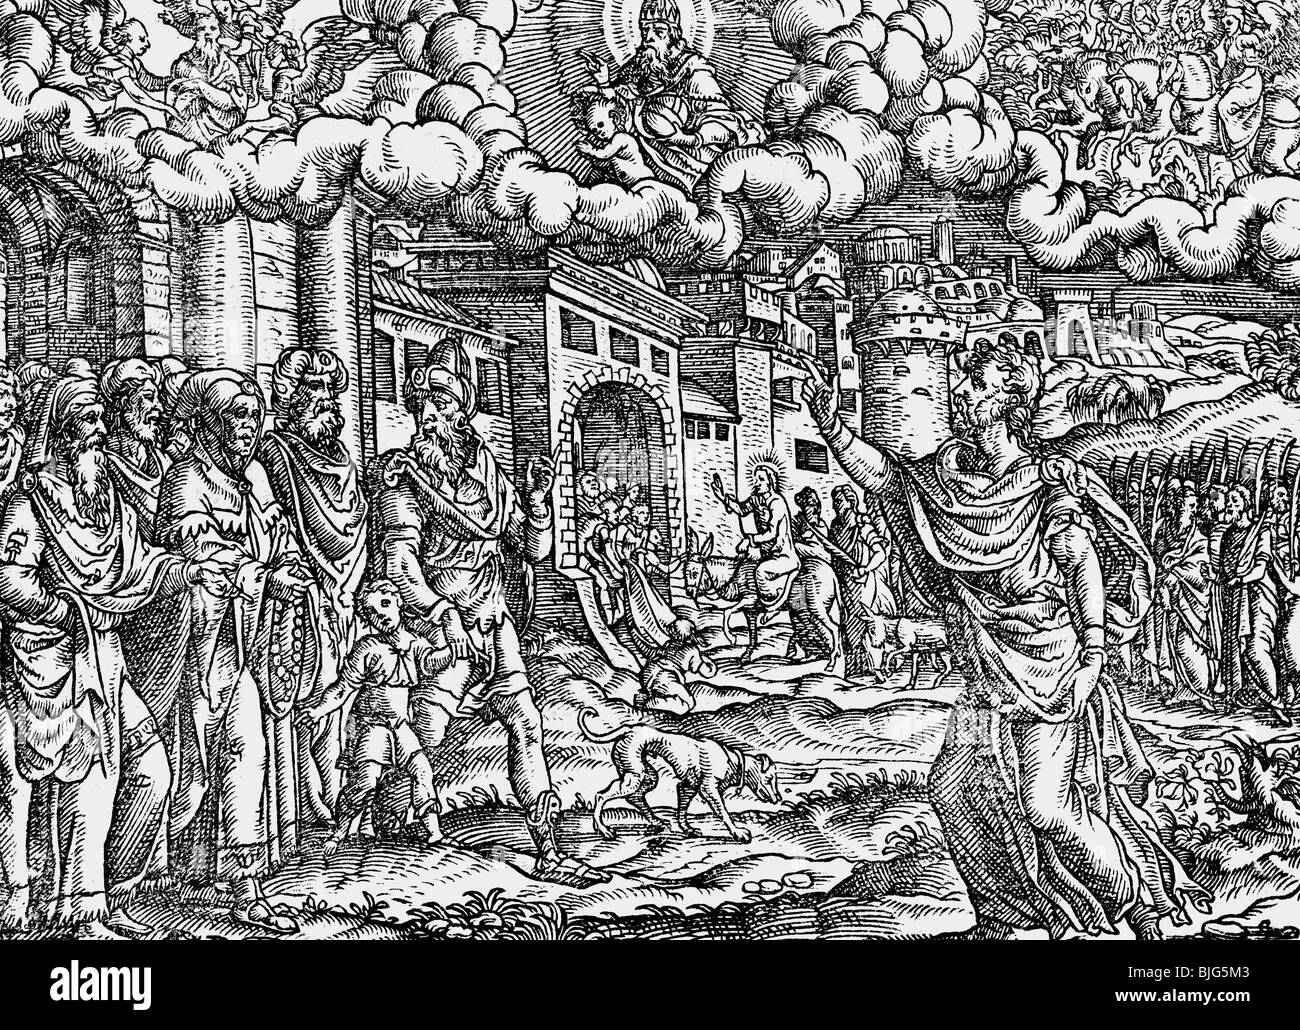 fine arts, Amman, Jost (1539-1591), woodcut, 15.5. cm x 11 cm, illustration from the bible, printed by Sigmund Feyerabend, Frankfurt on the Main, Germany, 1564, scene: Zechariah's vision, Jesus Christ entering Jerusalem, Artist's Copyright has not to be cleared Stock Photo